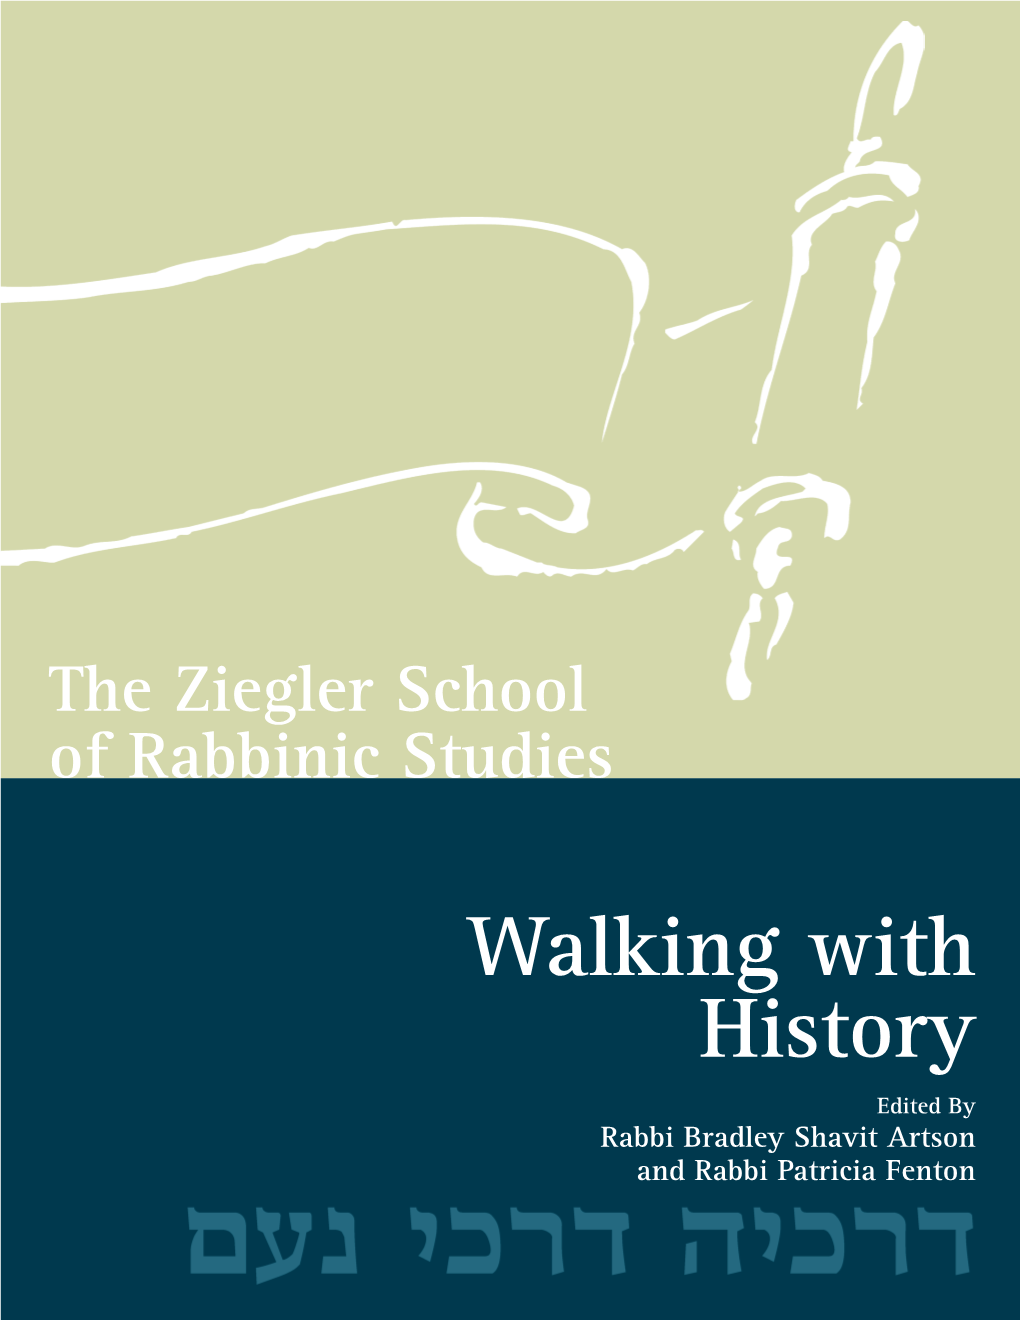 Walking with History Edited by Rabbi Bradley Shavit Artson and Rabbi Patricia Fenton in Memory of Harold Held and Louise Held, of Blessed Memory